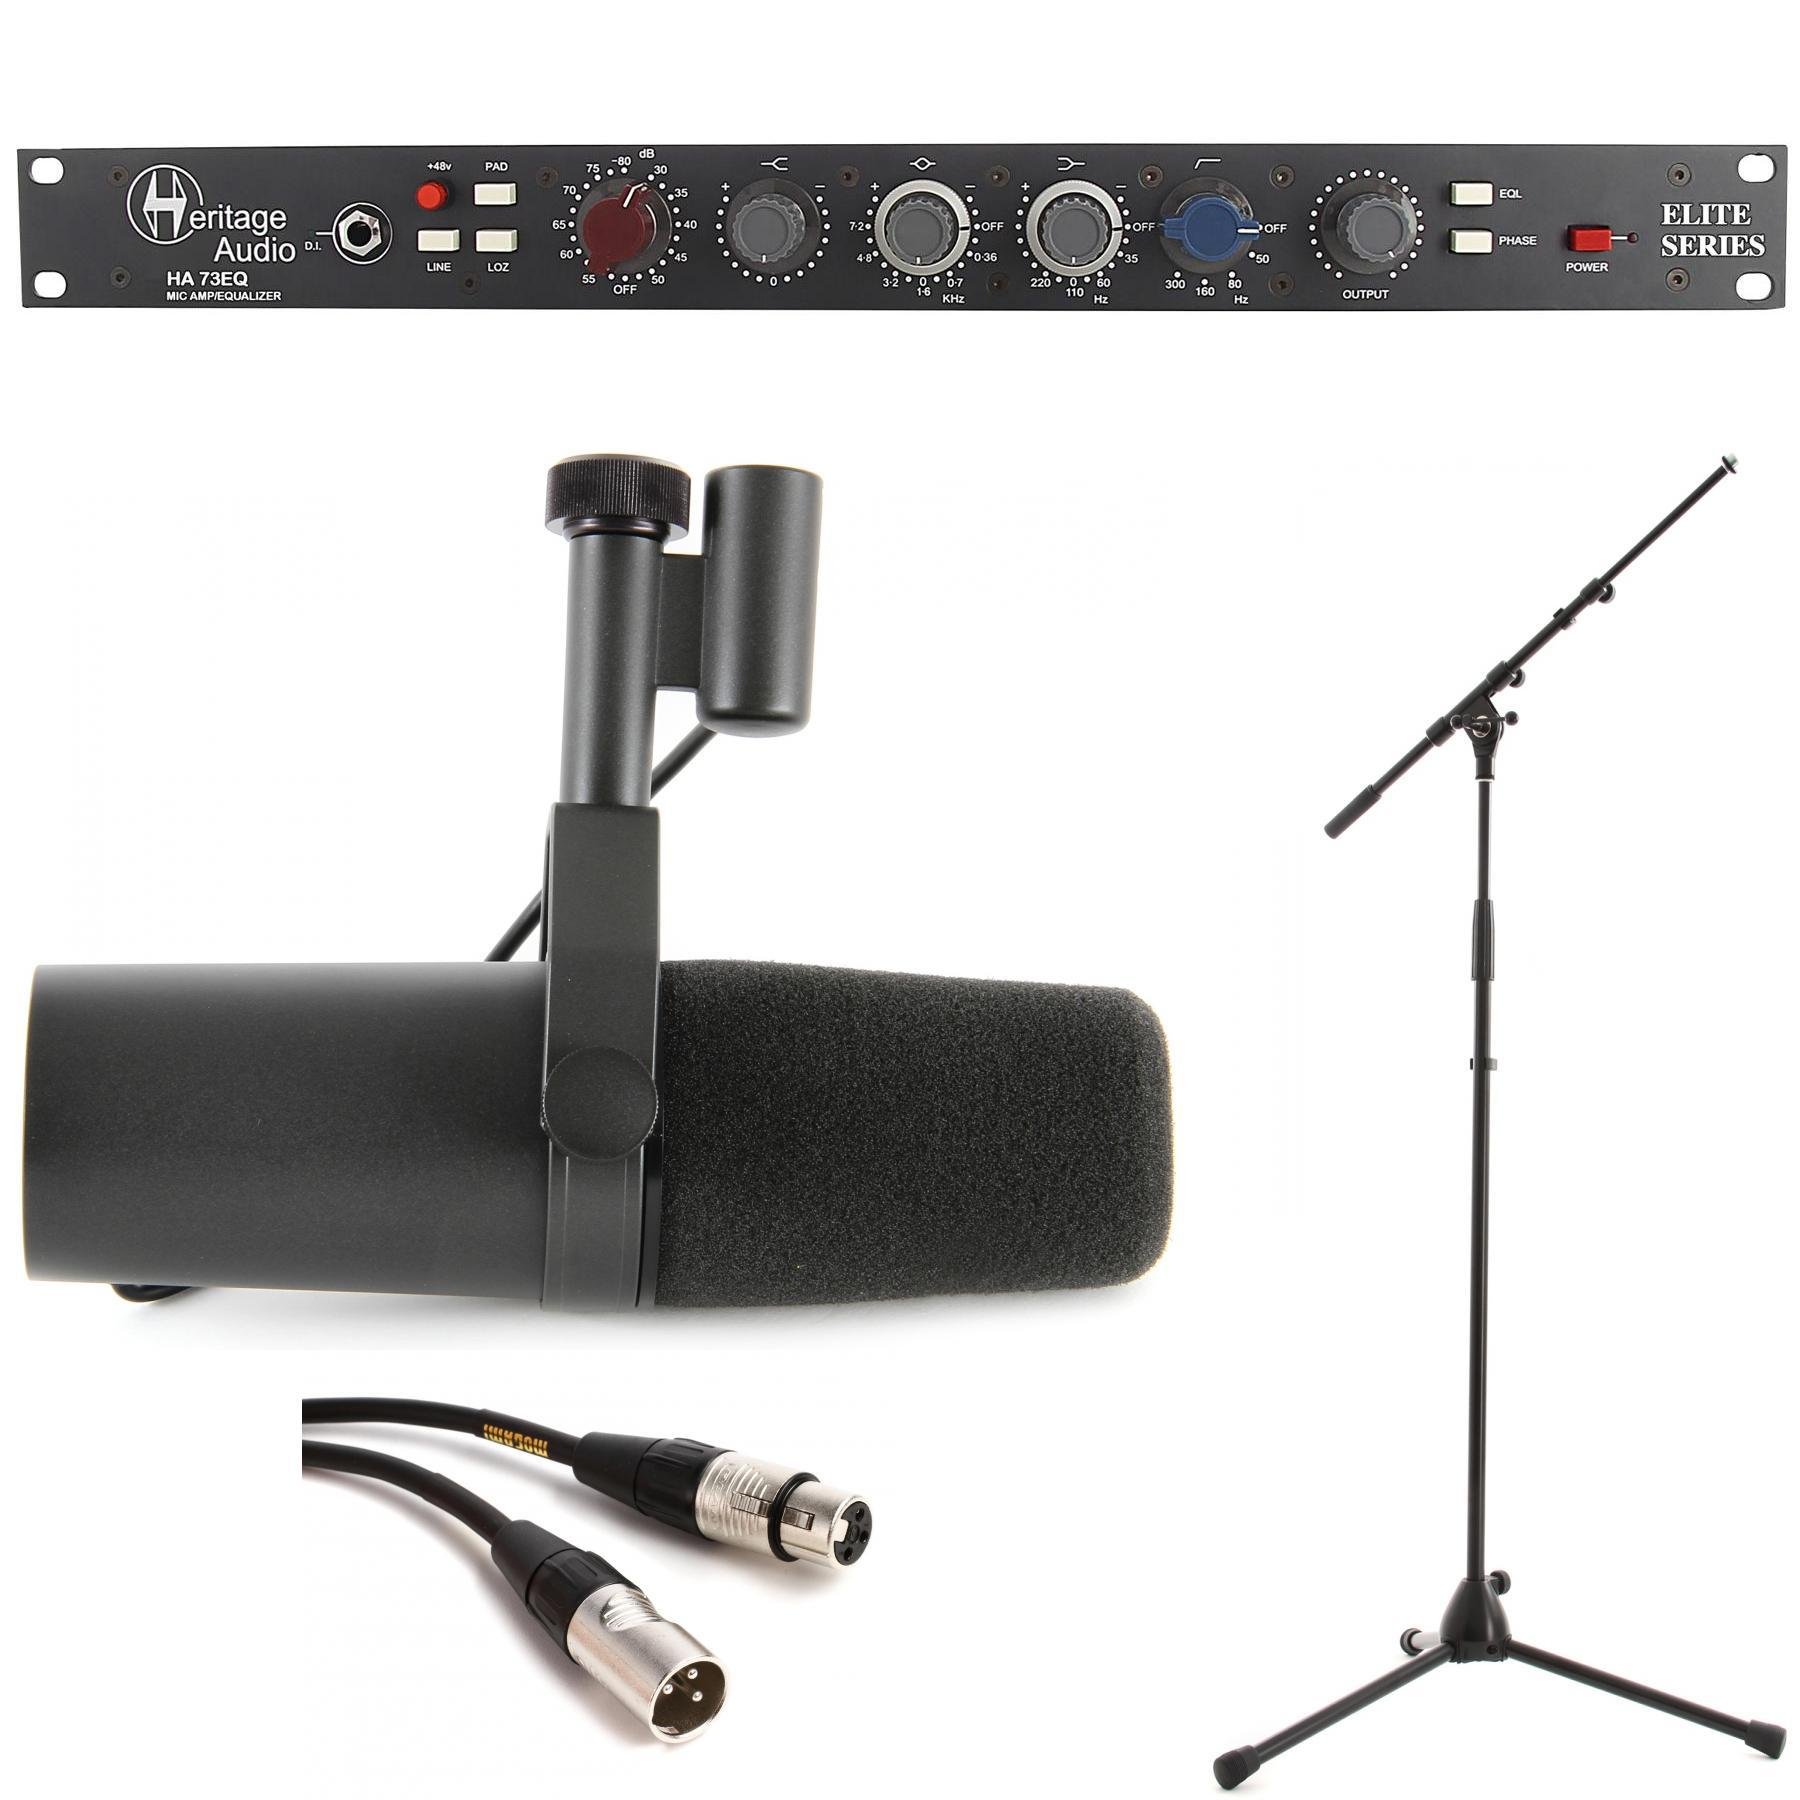 Heritage Audio Ha73eq Shure Sm7b Vocal Recording Package Sweetwater